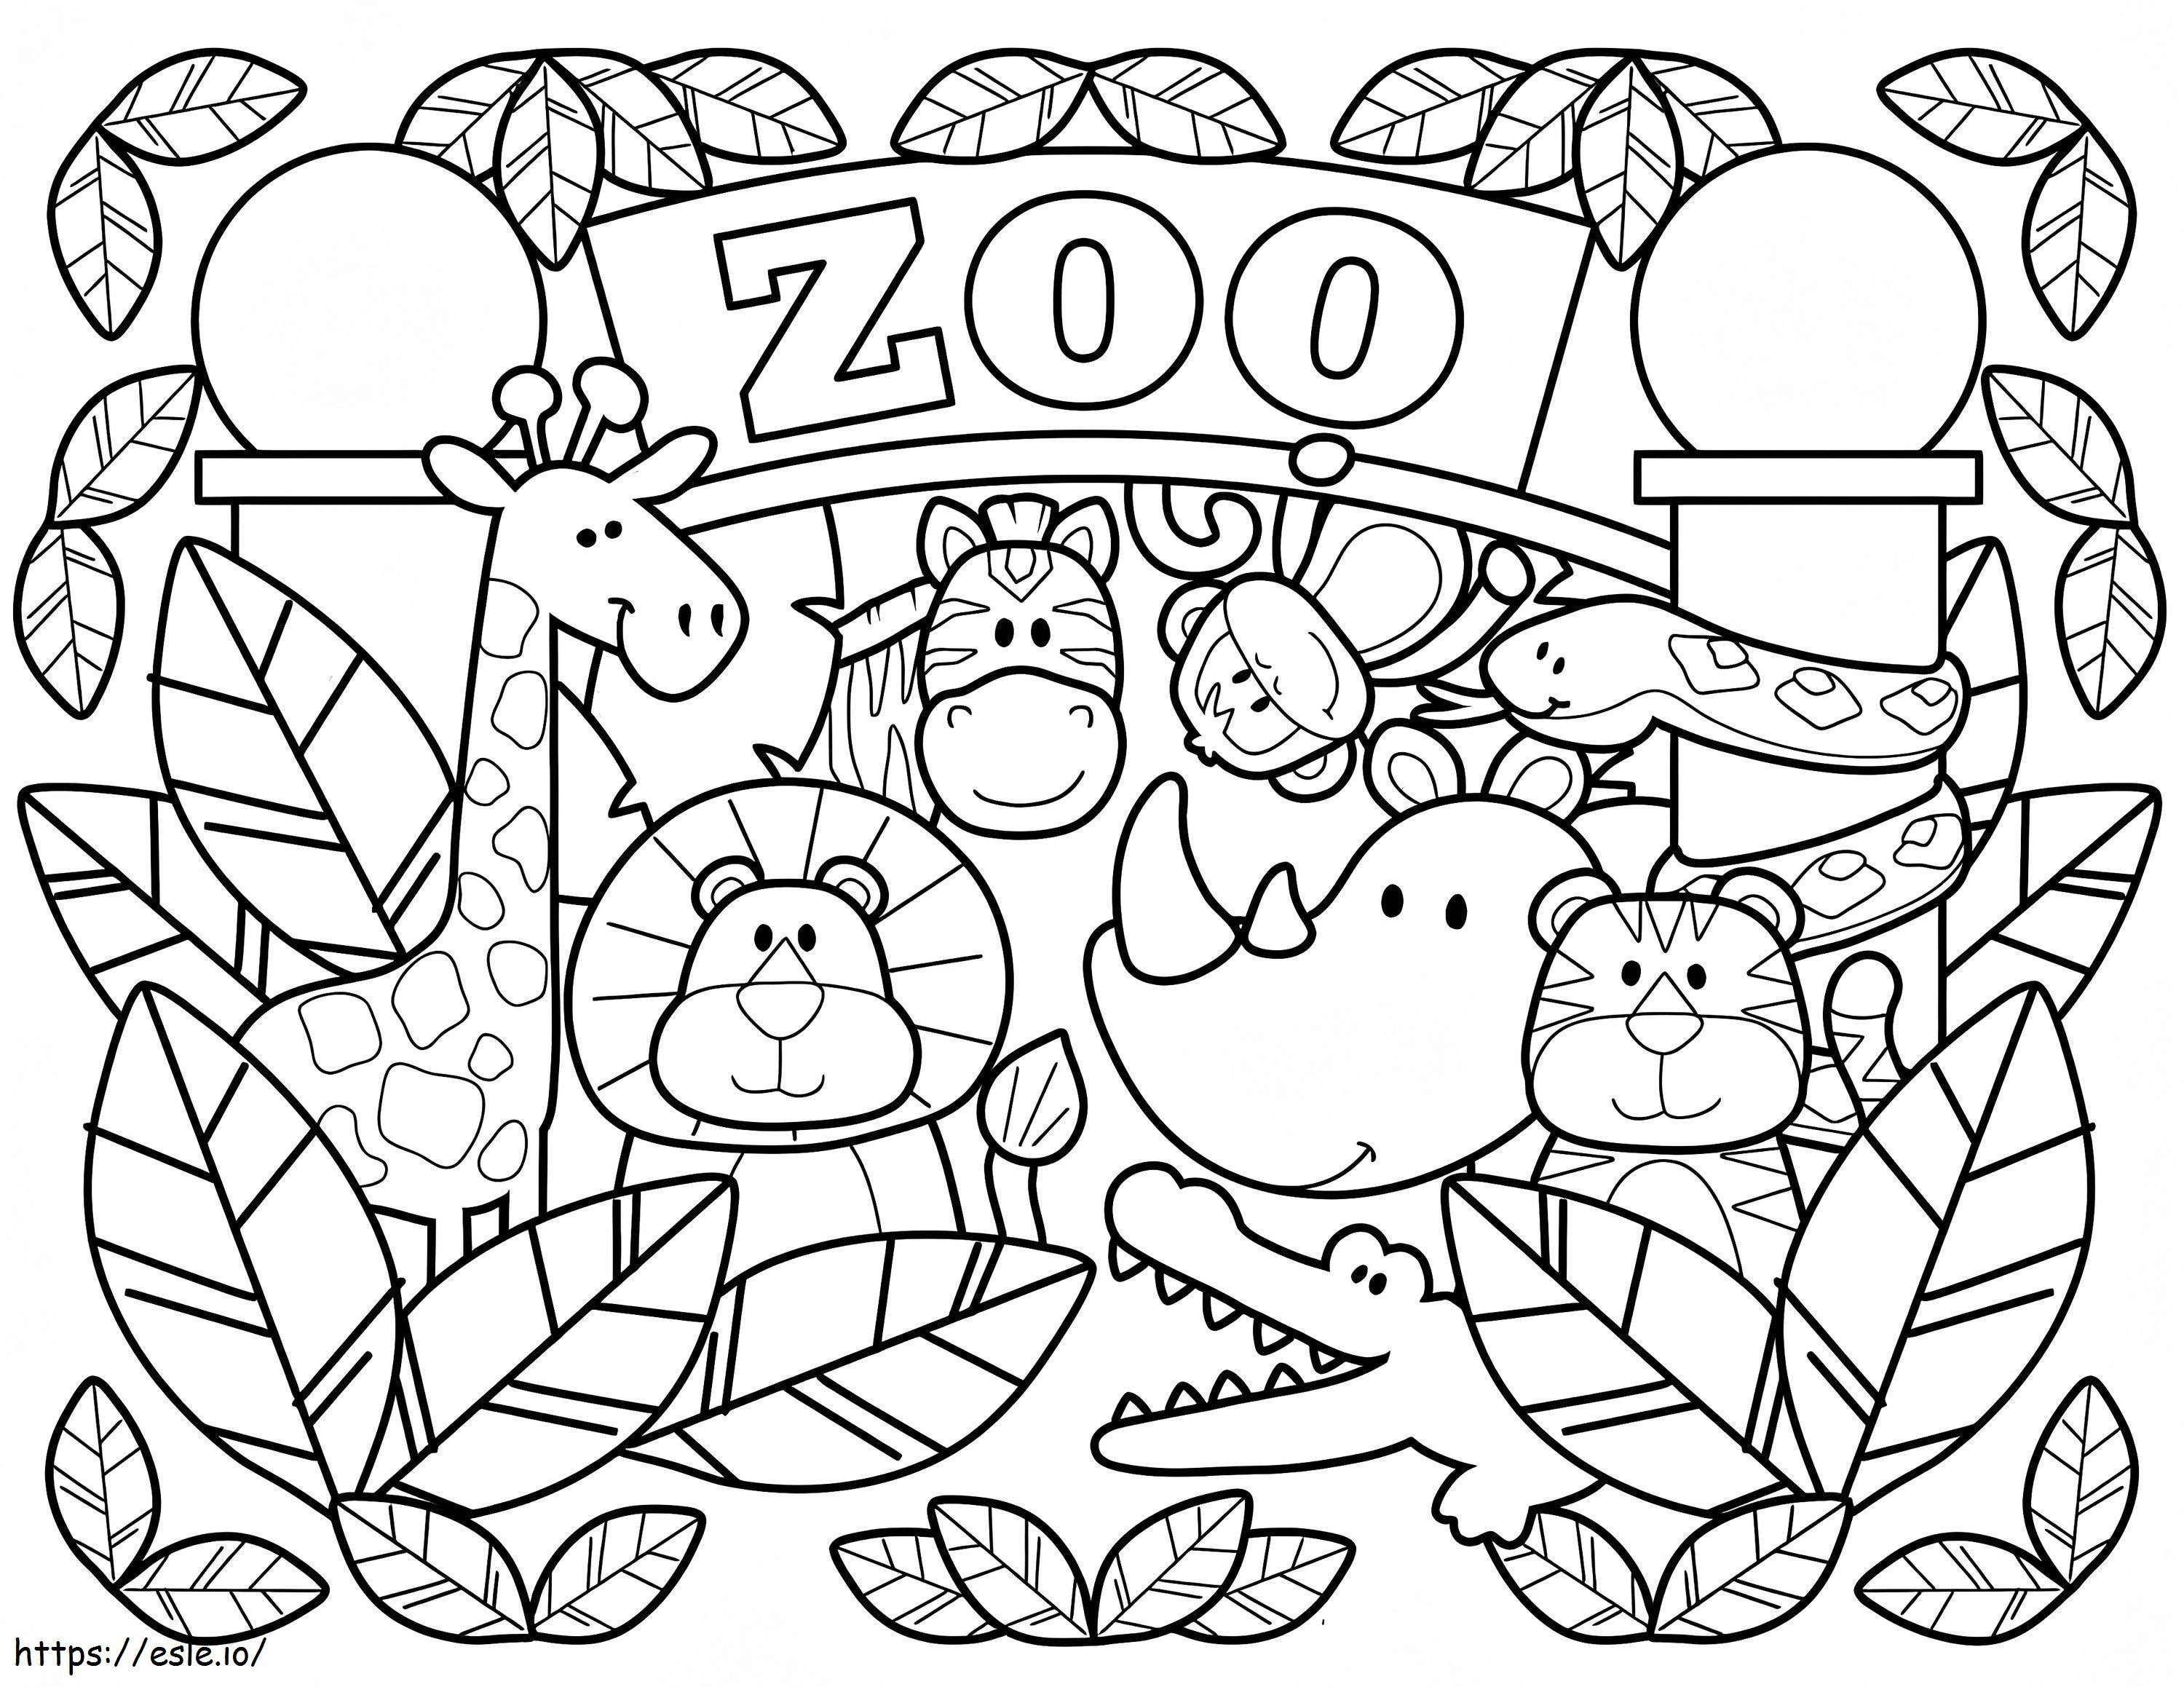 Adorable Zoo coloring page